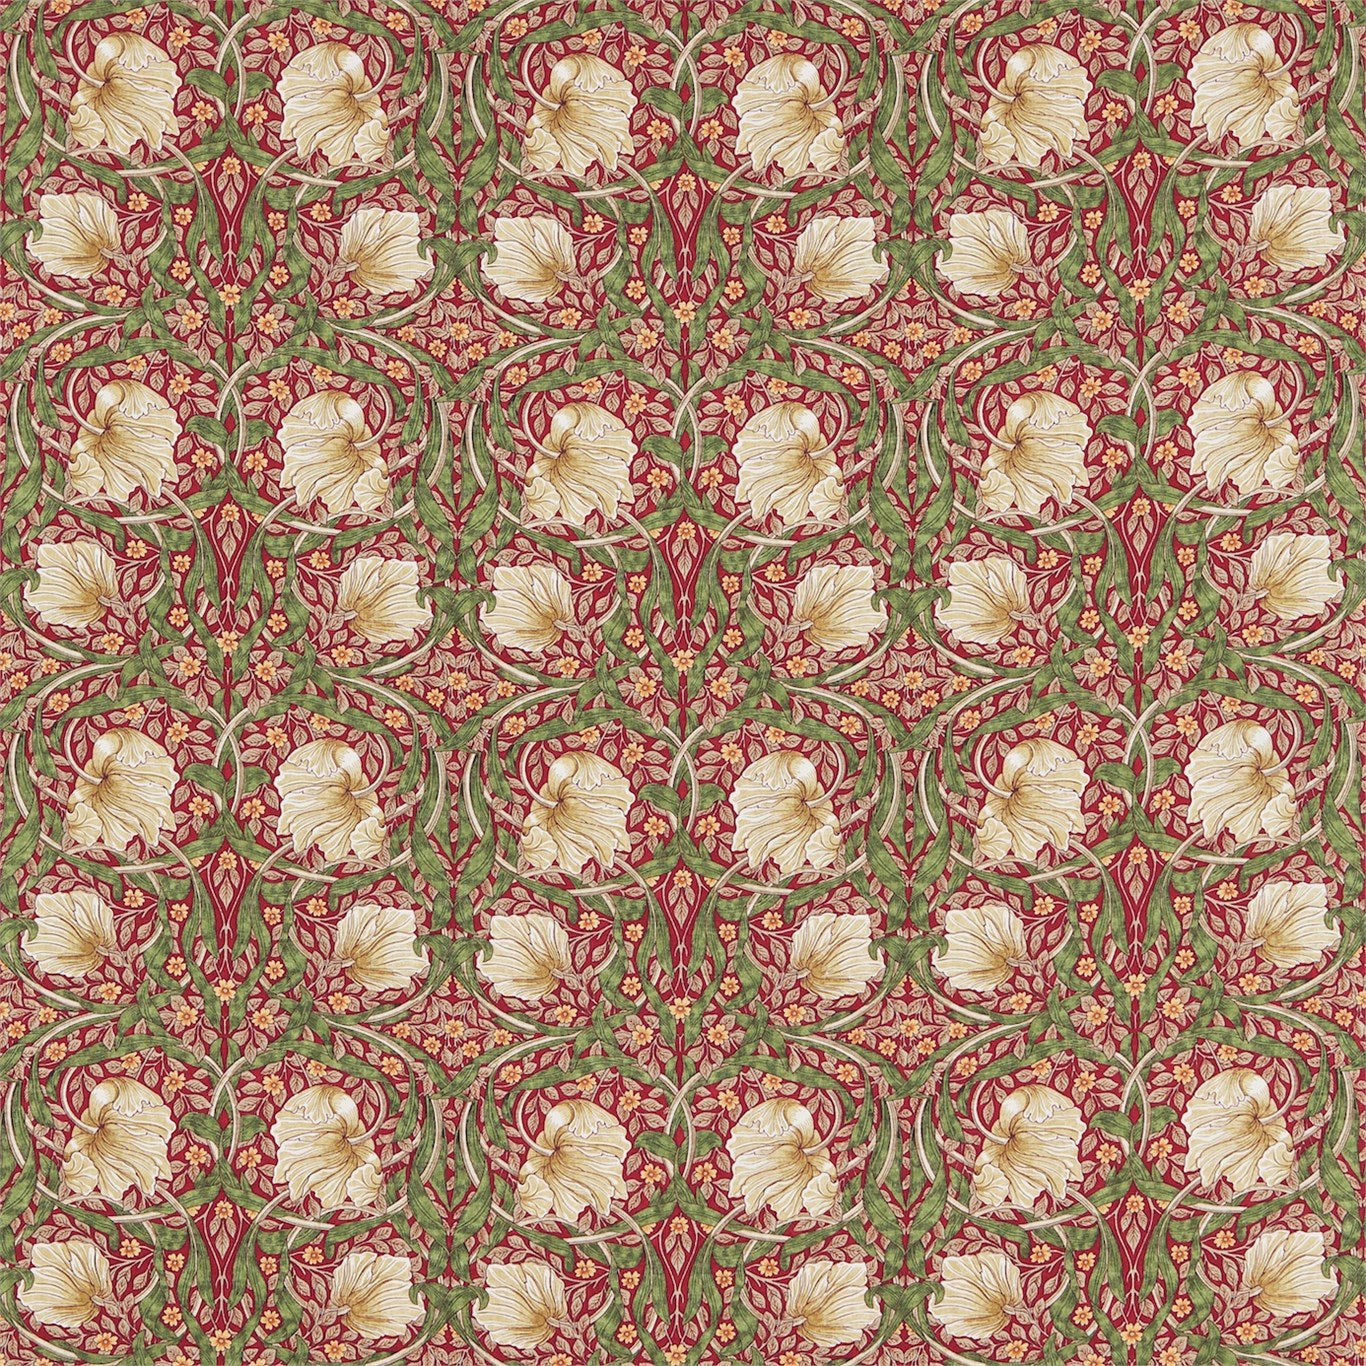 Pimpernel Fabric by Morris & Co.